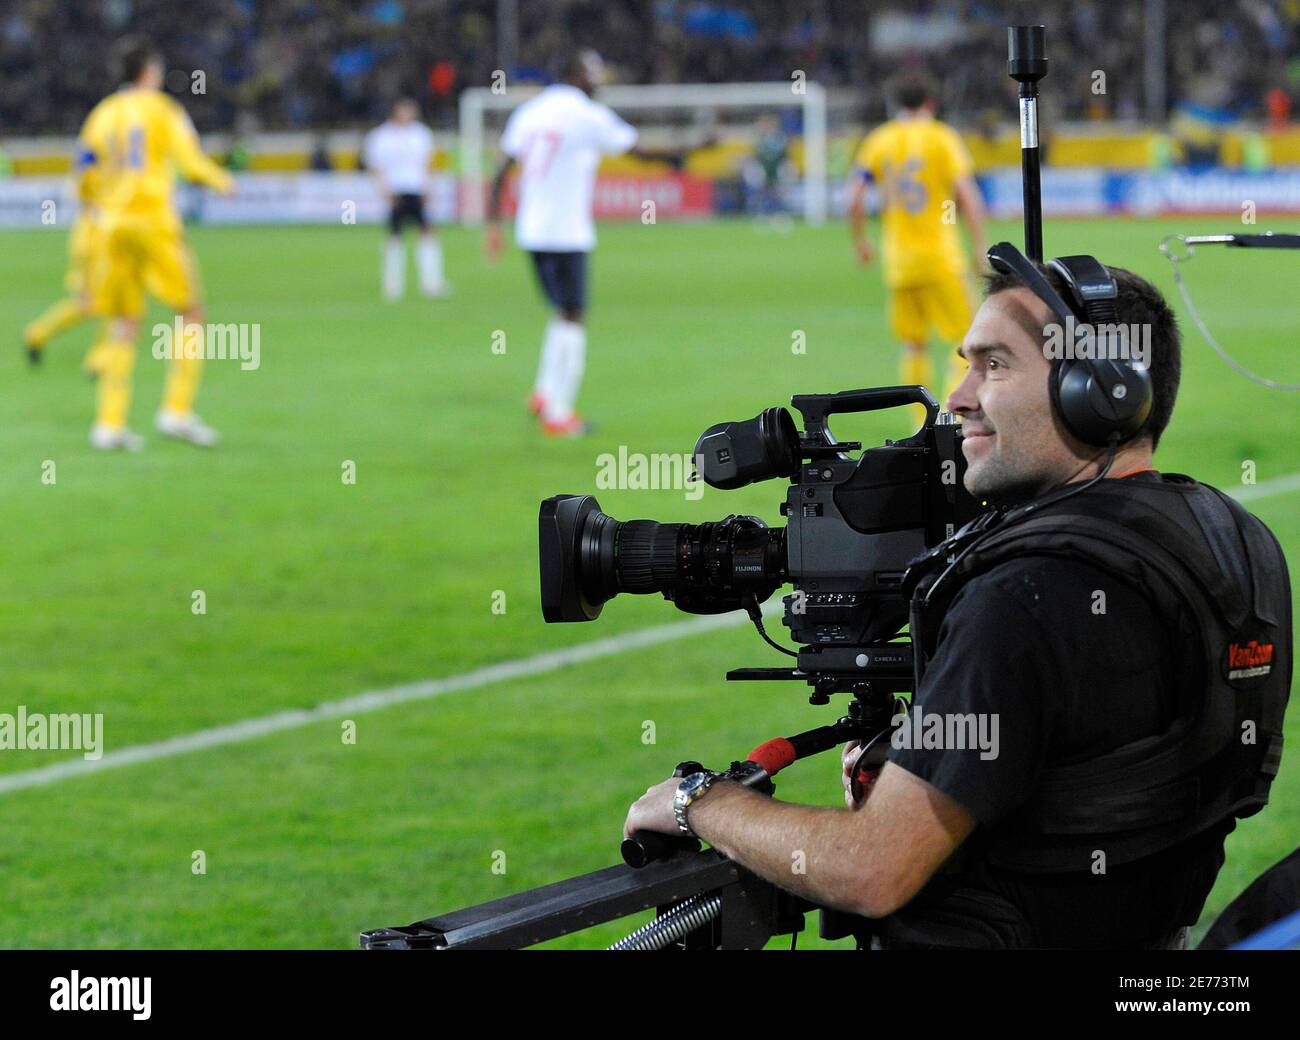 A television camera operator works during the World Cup 2010 qualifying  soccer match between Ukraine and England at the Dnipro Arena in  Dnipropetrovsk October 10, 2009. England fans will only be able